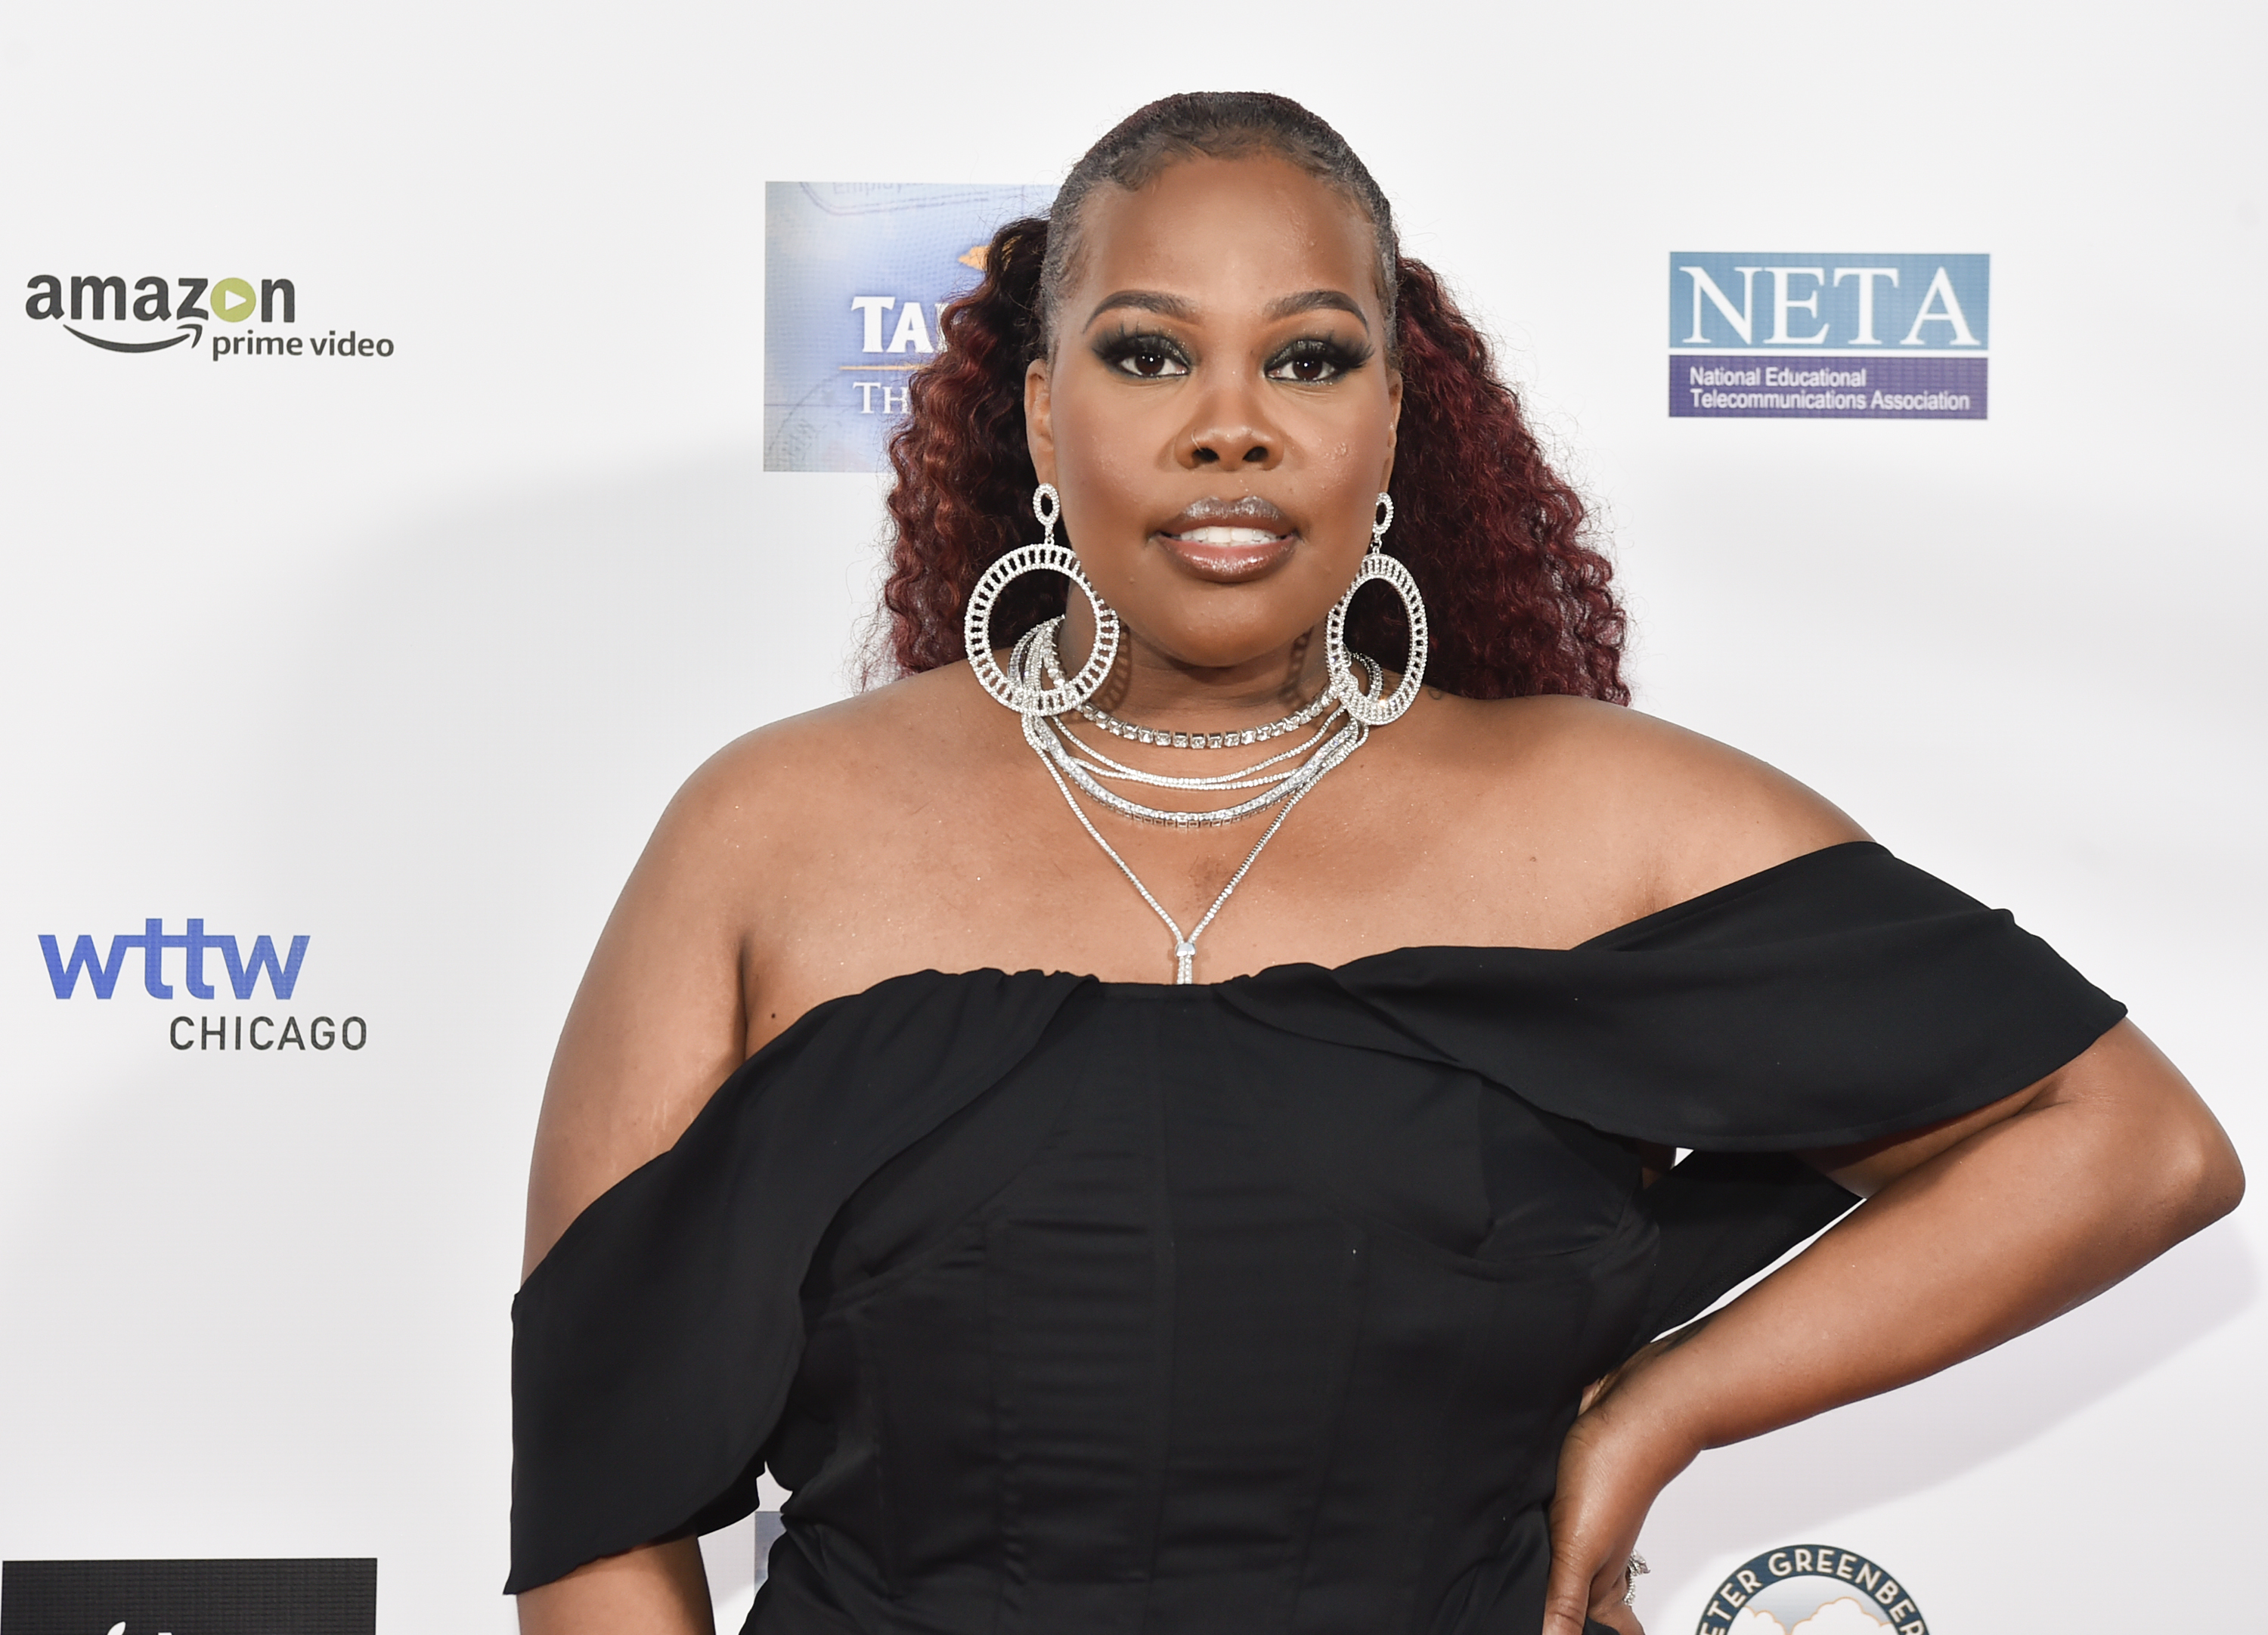 Amber Riley attends the Los Angeles premiere of "Tanzania: The Royal Tour" at Paramount Studios on April 21, 2022, in Los Angeles, California. | Source: Getty Images